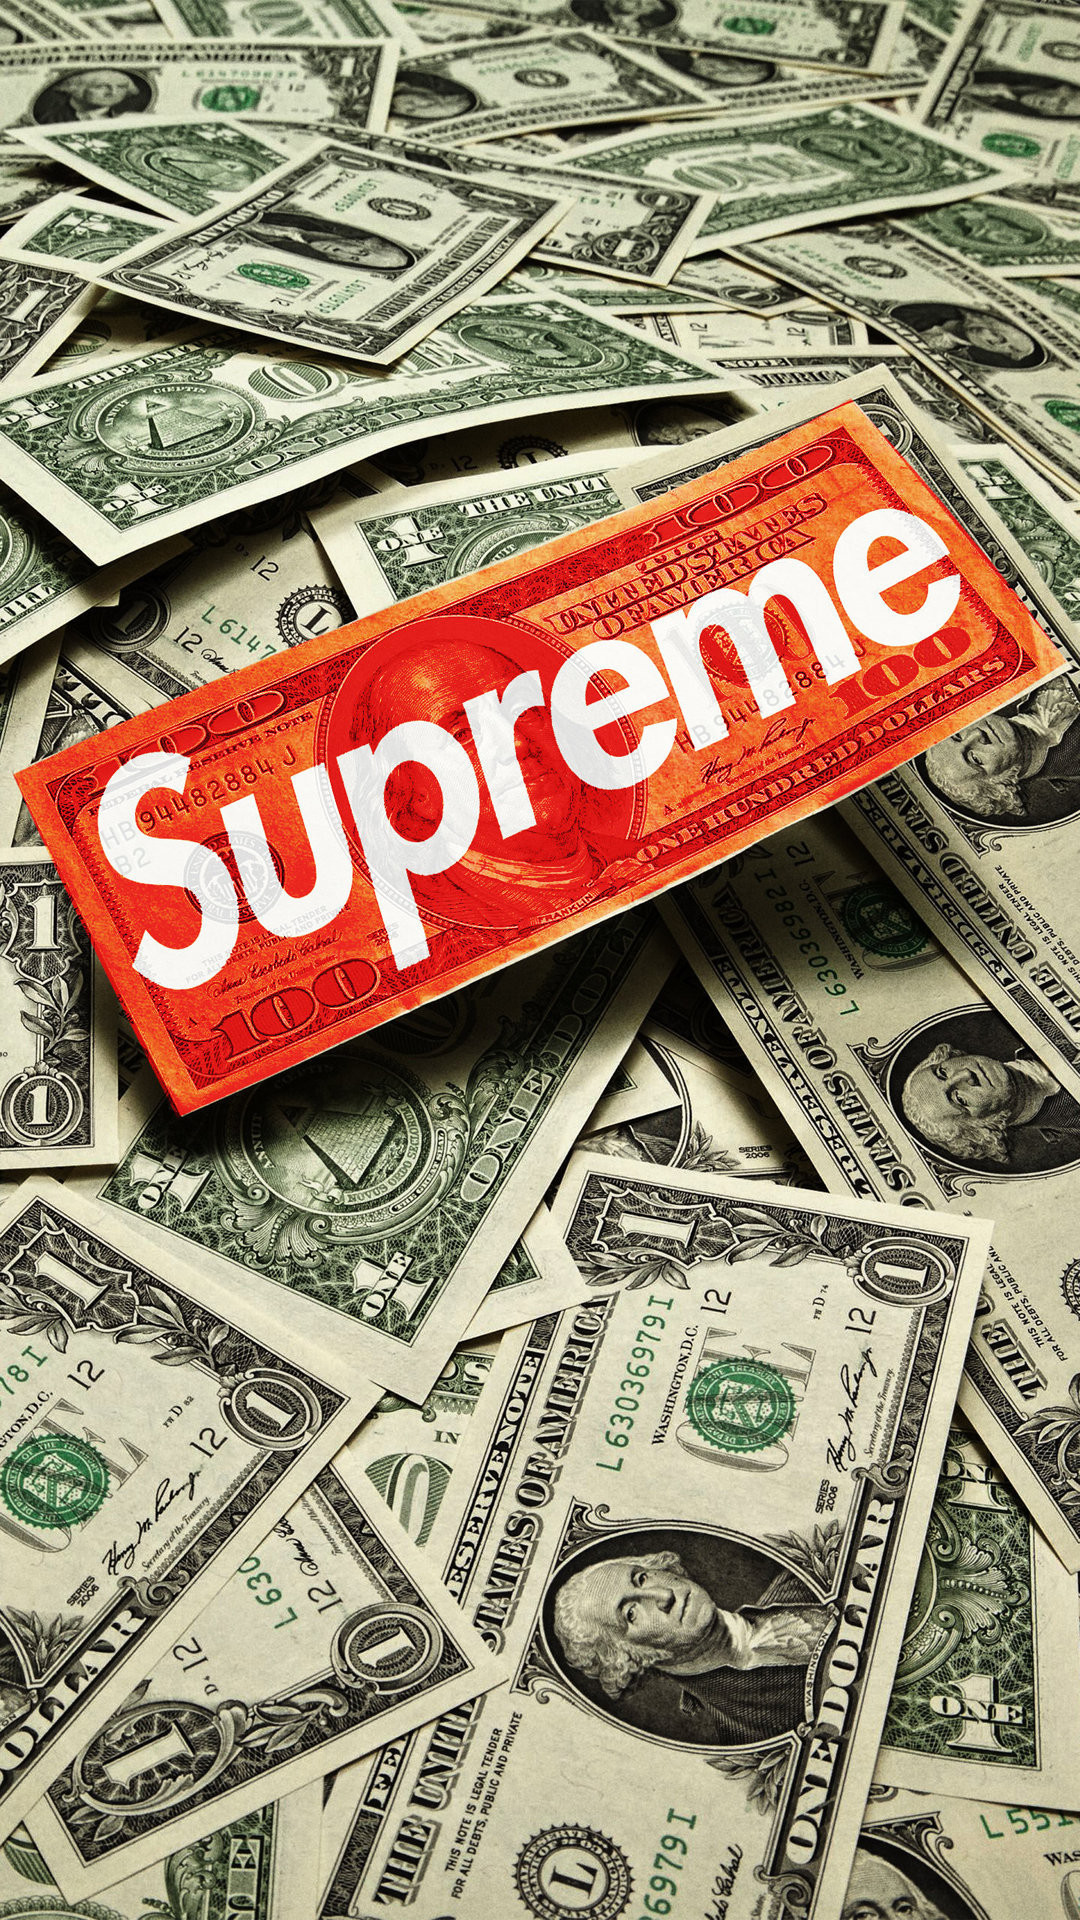 Free download Gucci X Supreme Wallpapers Top Free Gucci X Supreme  Backgrounds [1080x1920] for your Desktop, Mobile & Tablet, Explore 48+ Gucci  iPhone Wallpaper Supreme